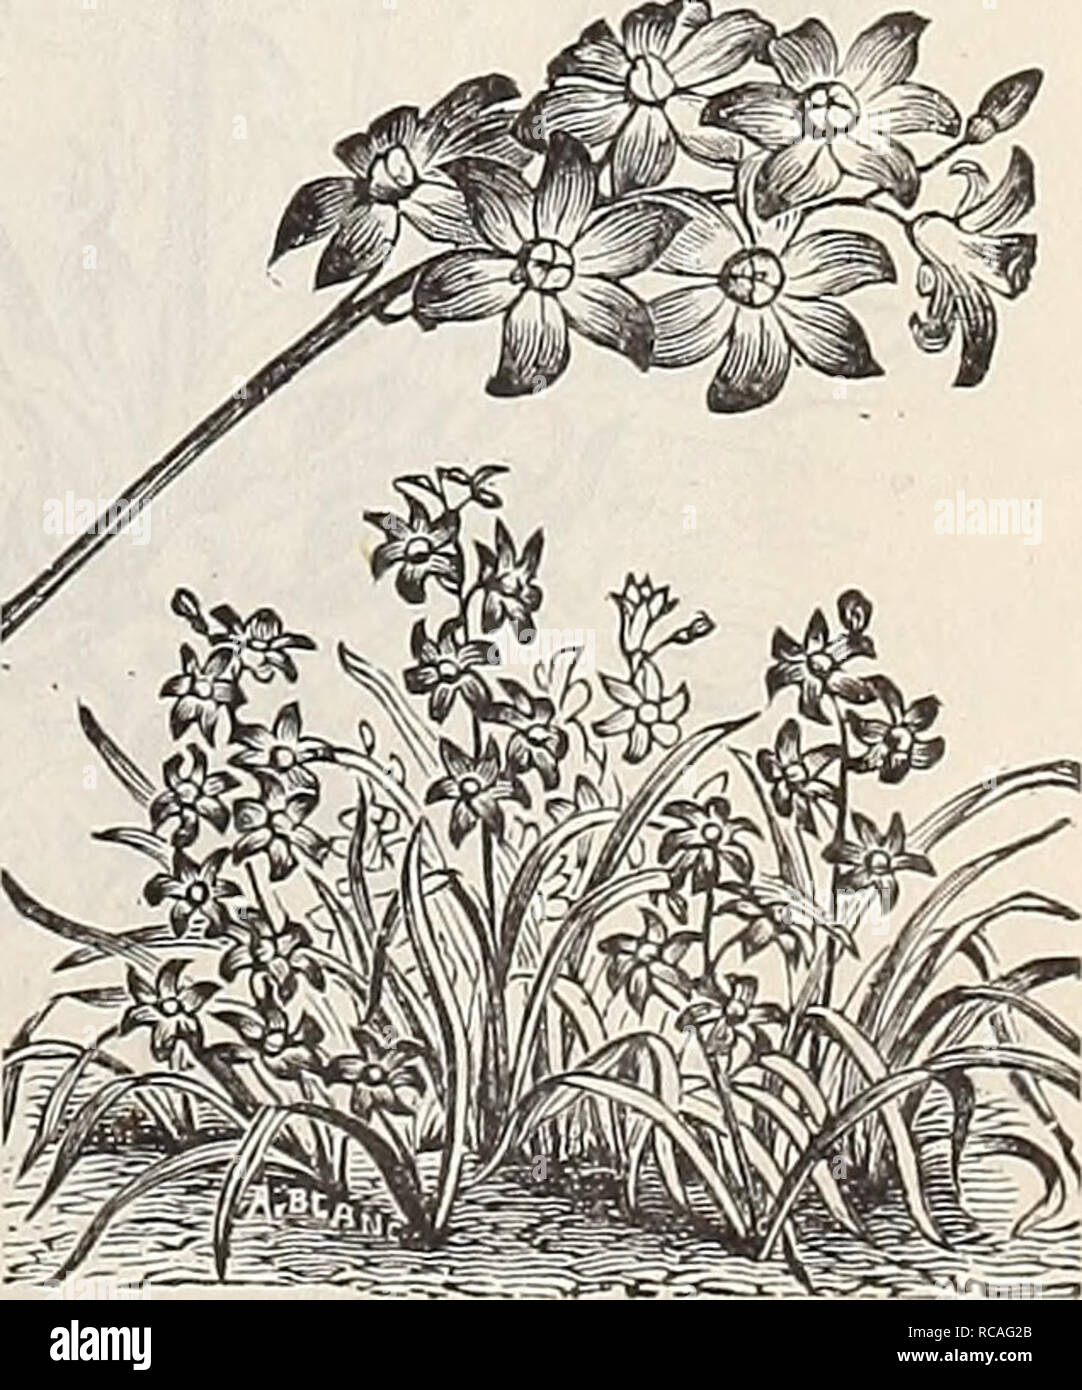 . Dreer's autumn catalogue : 1896 bulbs, plants, seeds. Bulbs (Plants) Catalogs; Flowers Seeds Catalogs; Gardening Equipment and supplies Catalogs; Nurseries (Horticulture) Catalogs; Fruit Seeds Catalogs. chionodoxa. ( Glory of the Snow.) BABIANA. A charming genus with leaves of darkest green, thickly covered with downy hairs, and bearing showy spikes of flowers. They should have the pro- tection of a cold-frame, and are very successfully grown in pots. Height, 6 to 9 inches. Mixed Varieties. 3 for 10 cts., 40 cts. per doz., §3.00 per 100. CALOCHORTUS. (Mariposa, or Butterfly Tulip.) Very beau Stock Photo